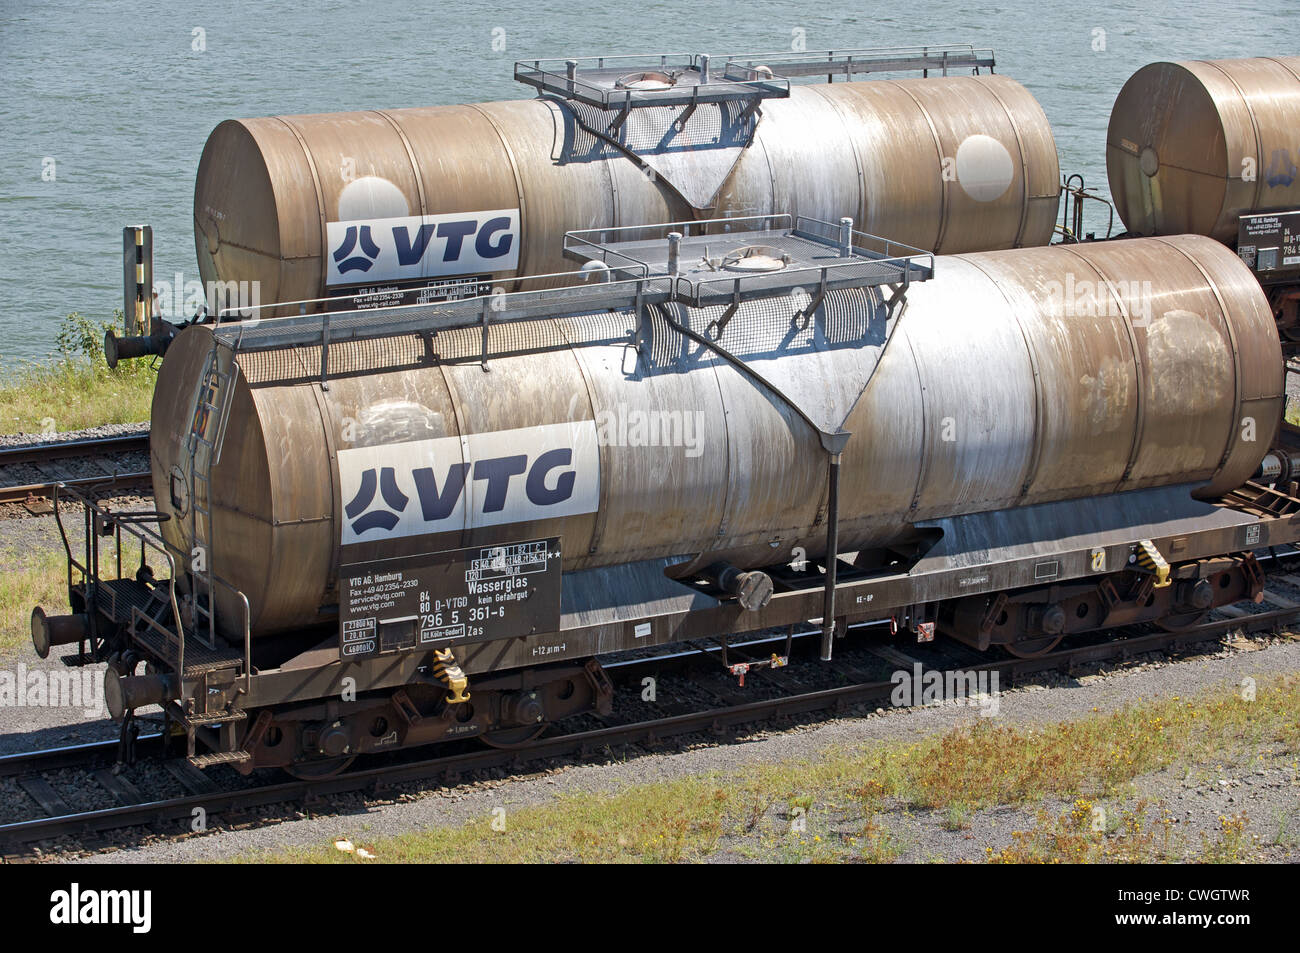 Rail tankers used for hauling watergas Stock Photo